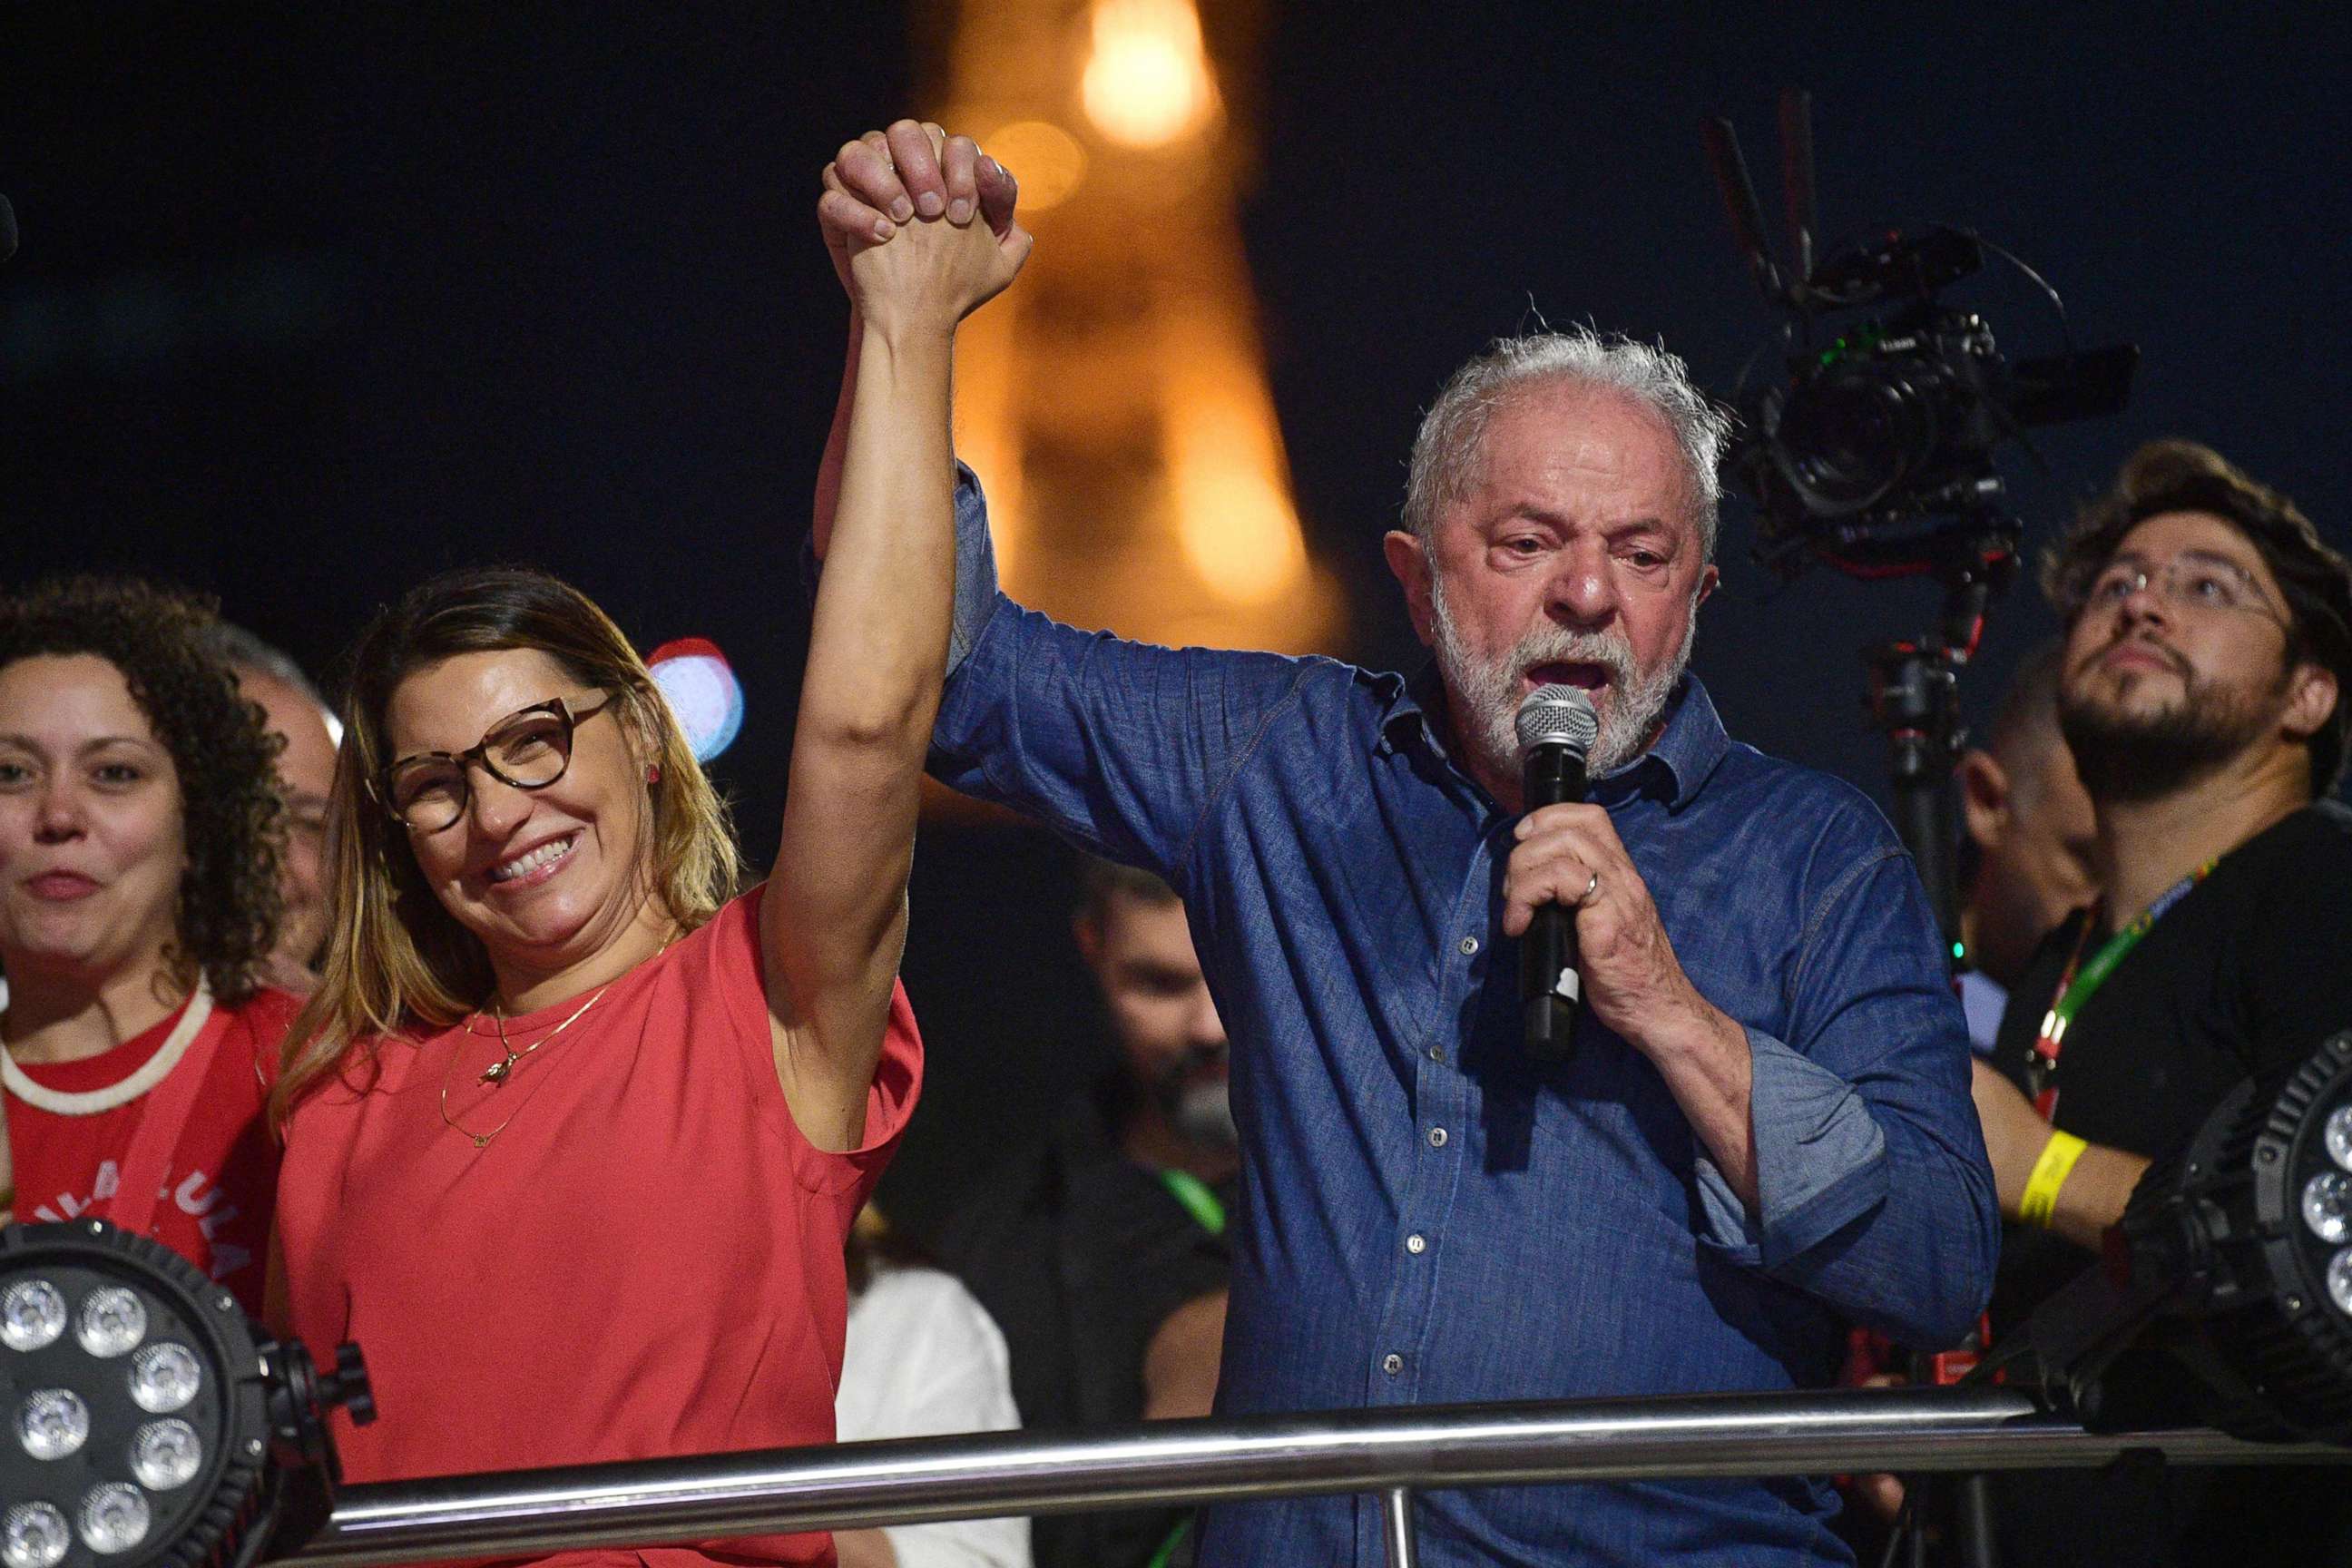 PHOTO: Brazilian president-elect Luiz Inacio Lula da Silva holds the hand of his wife, Rosangela "Janja" da Silva, while delivering a speech to supporters after winning the presidential run-off election, in Sao Paulo, Brazil, on Oct. 30, 2022.